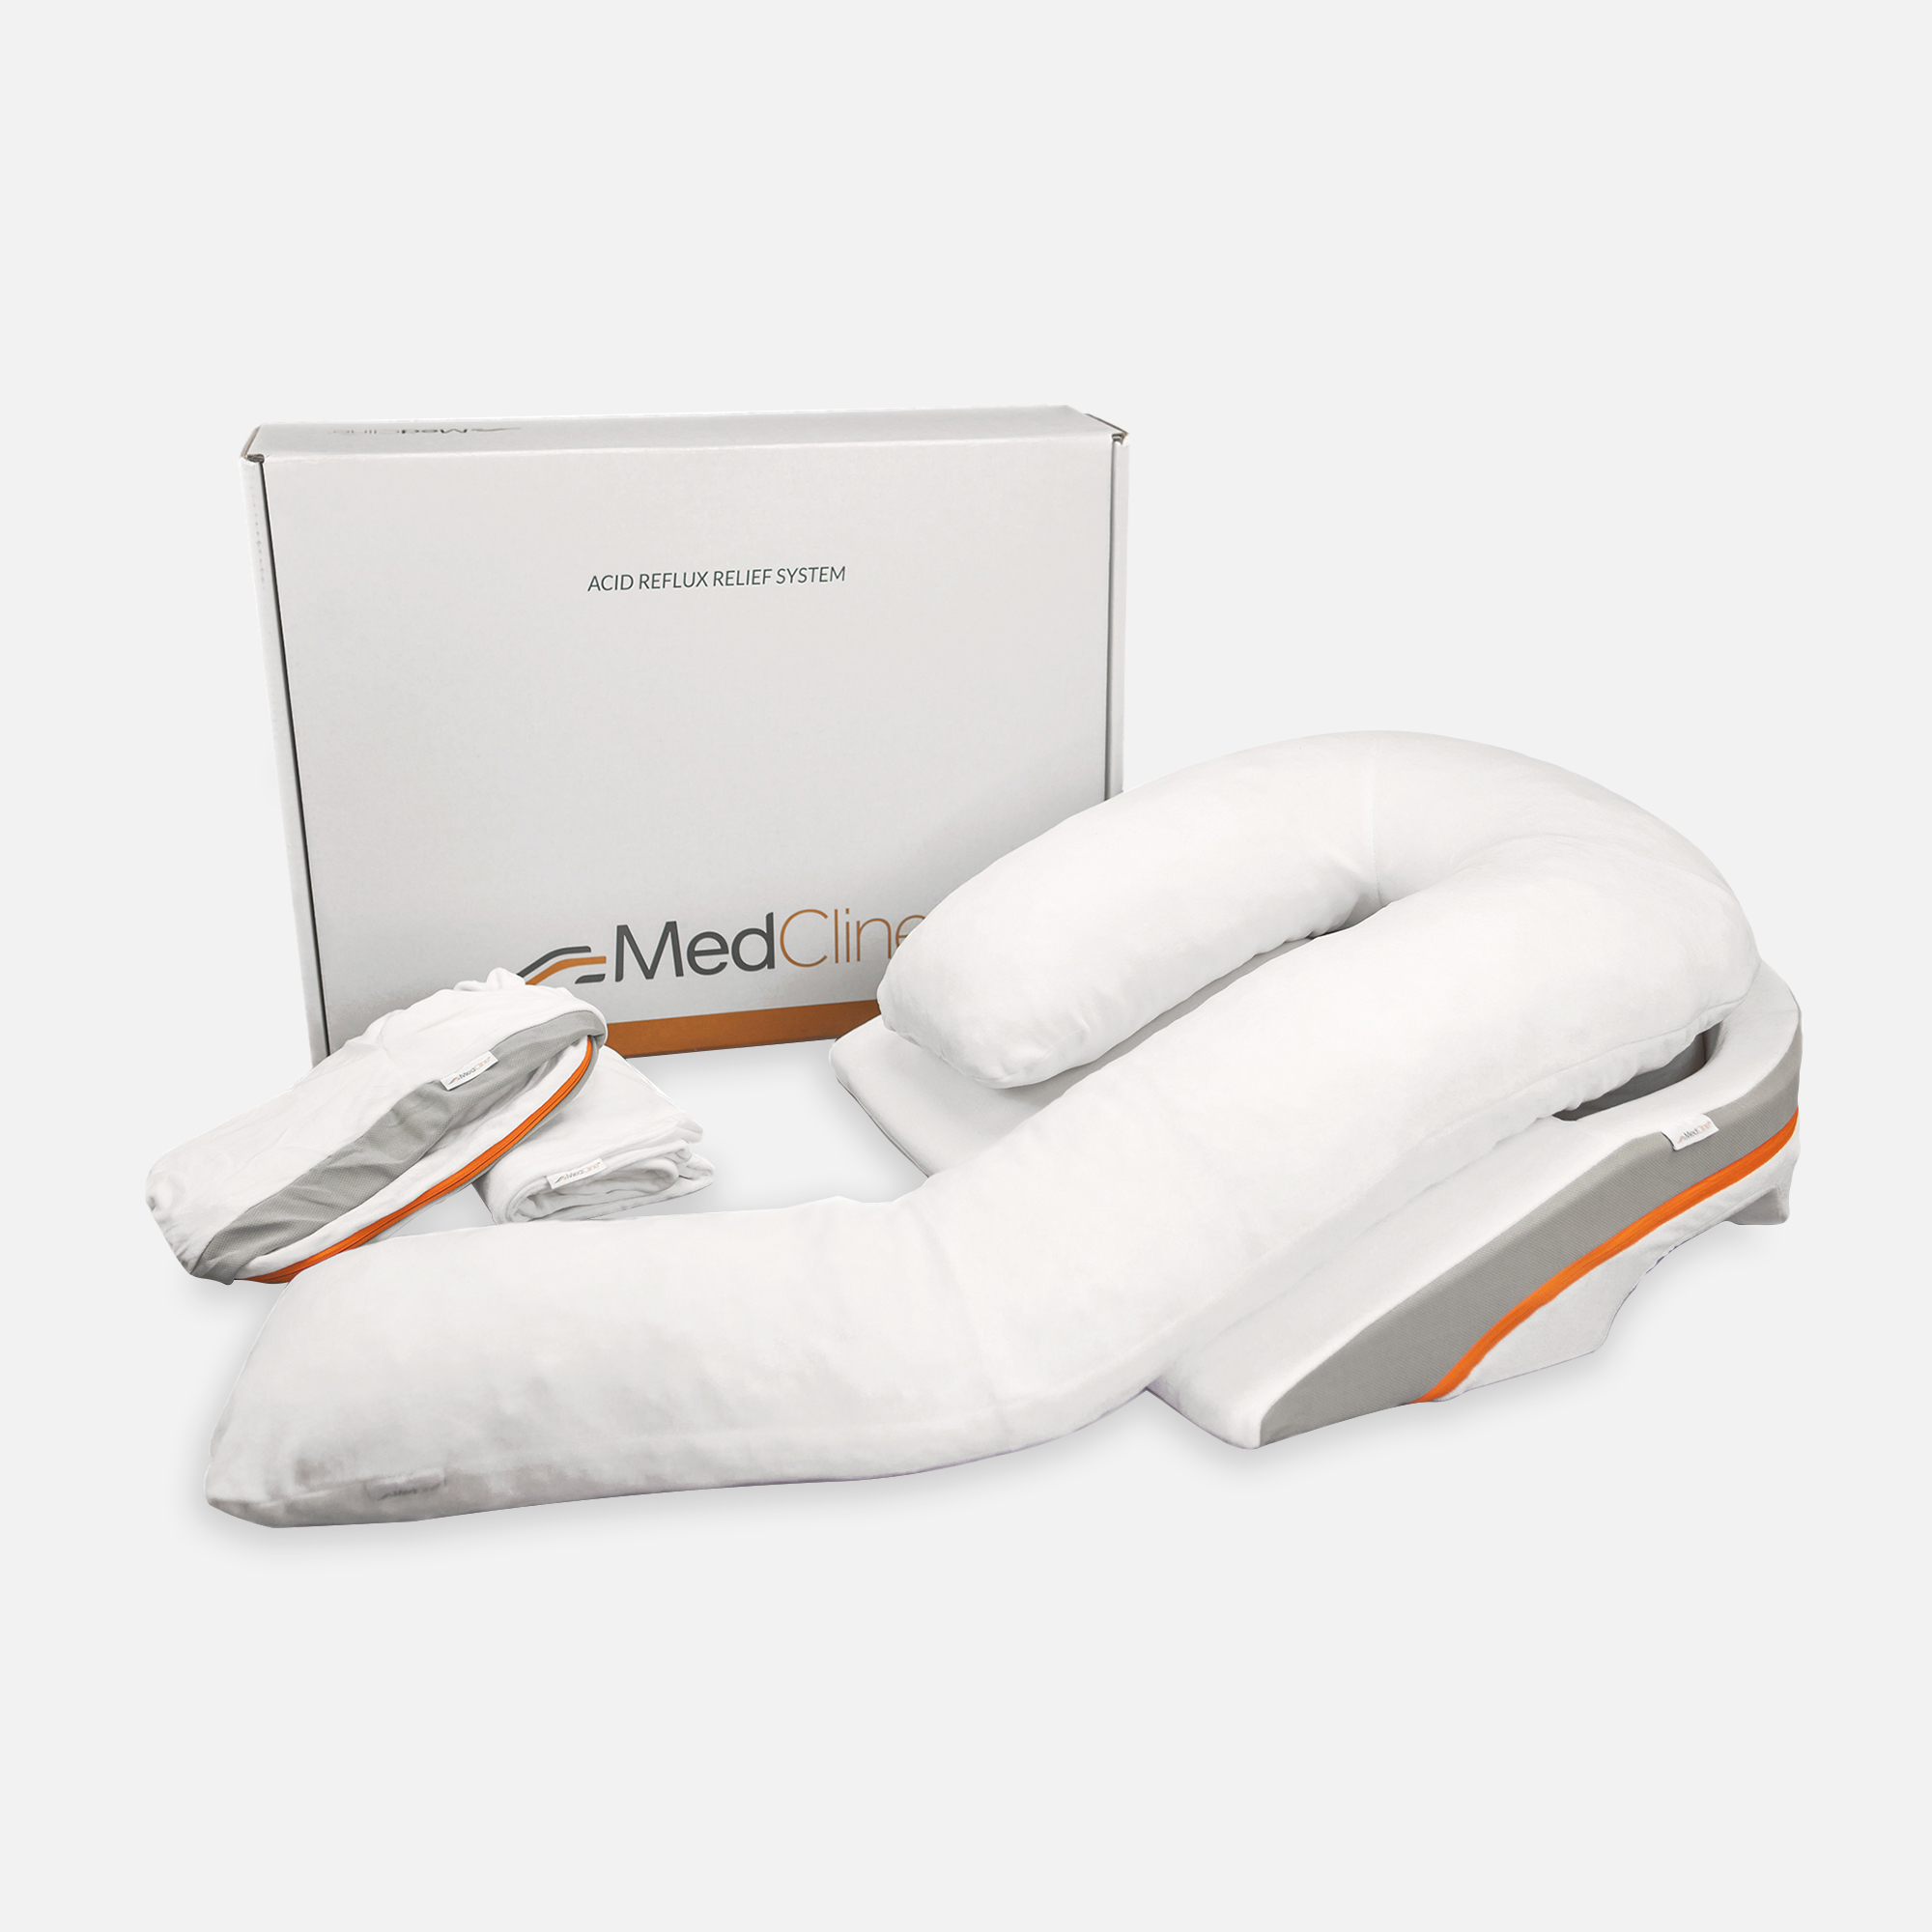 FSA Eligible | MedCline Acid Reflux Relief Pillow System + Extra Cases